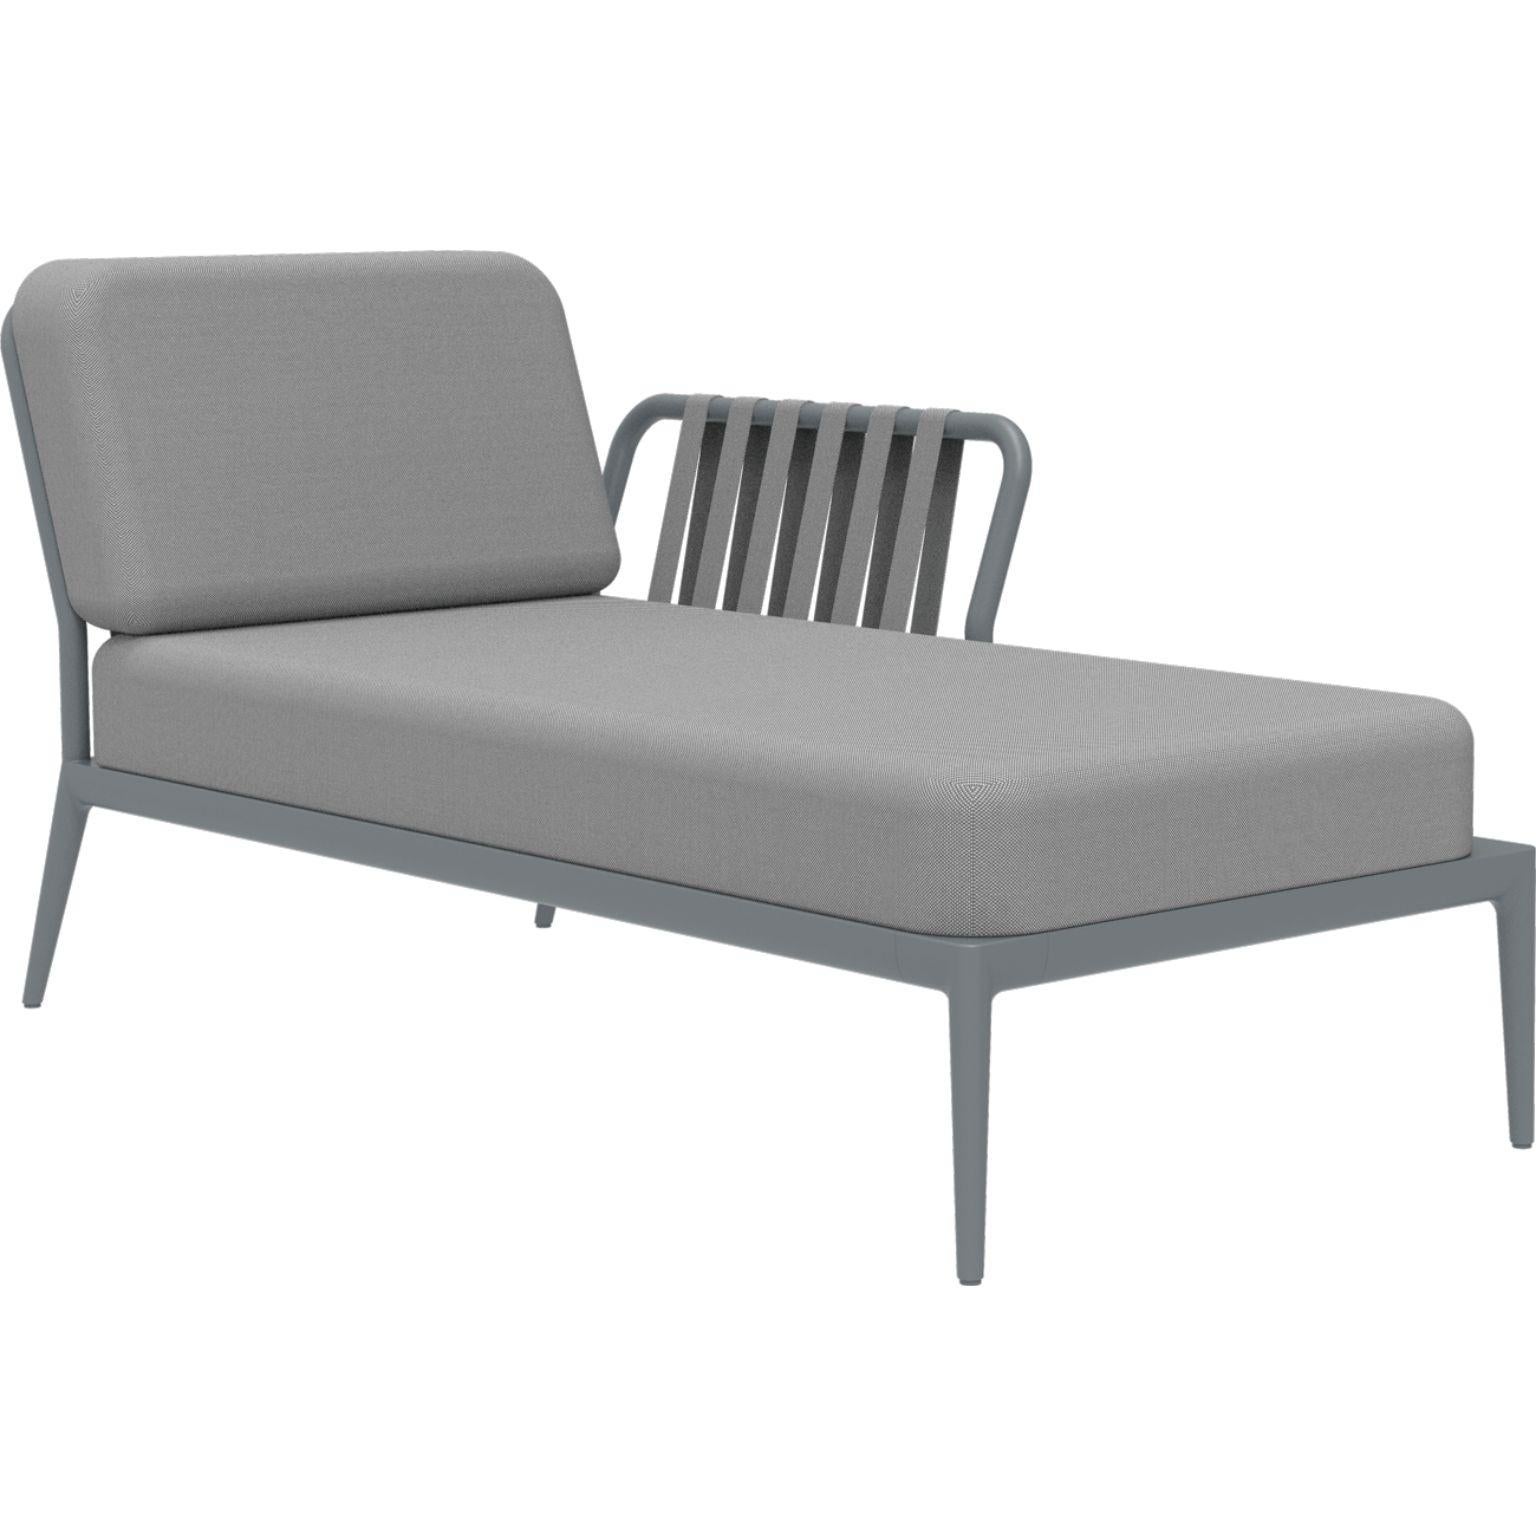 Ribbons Grey Left Chaise Longue by MOWEE
Dimensions: D80 x W155 x H81 cm
Material: Aluminum, Upholstery
Weight: 28 kg
Also Available in different colours and finishes. 

An unmistakable collection for its beauty and robustness. A tribute to